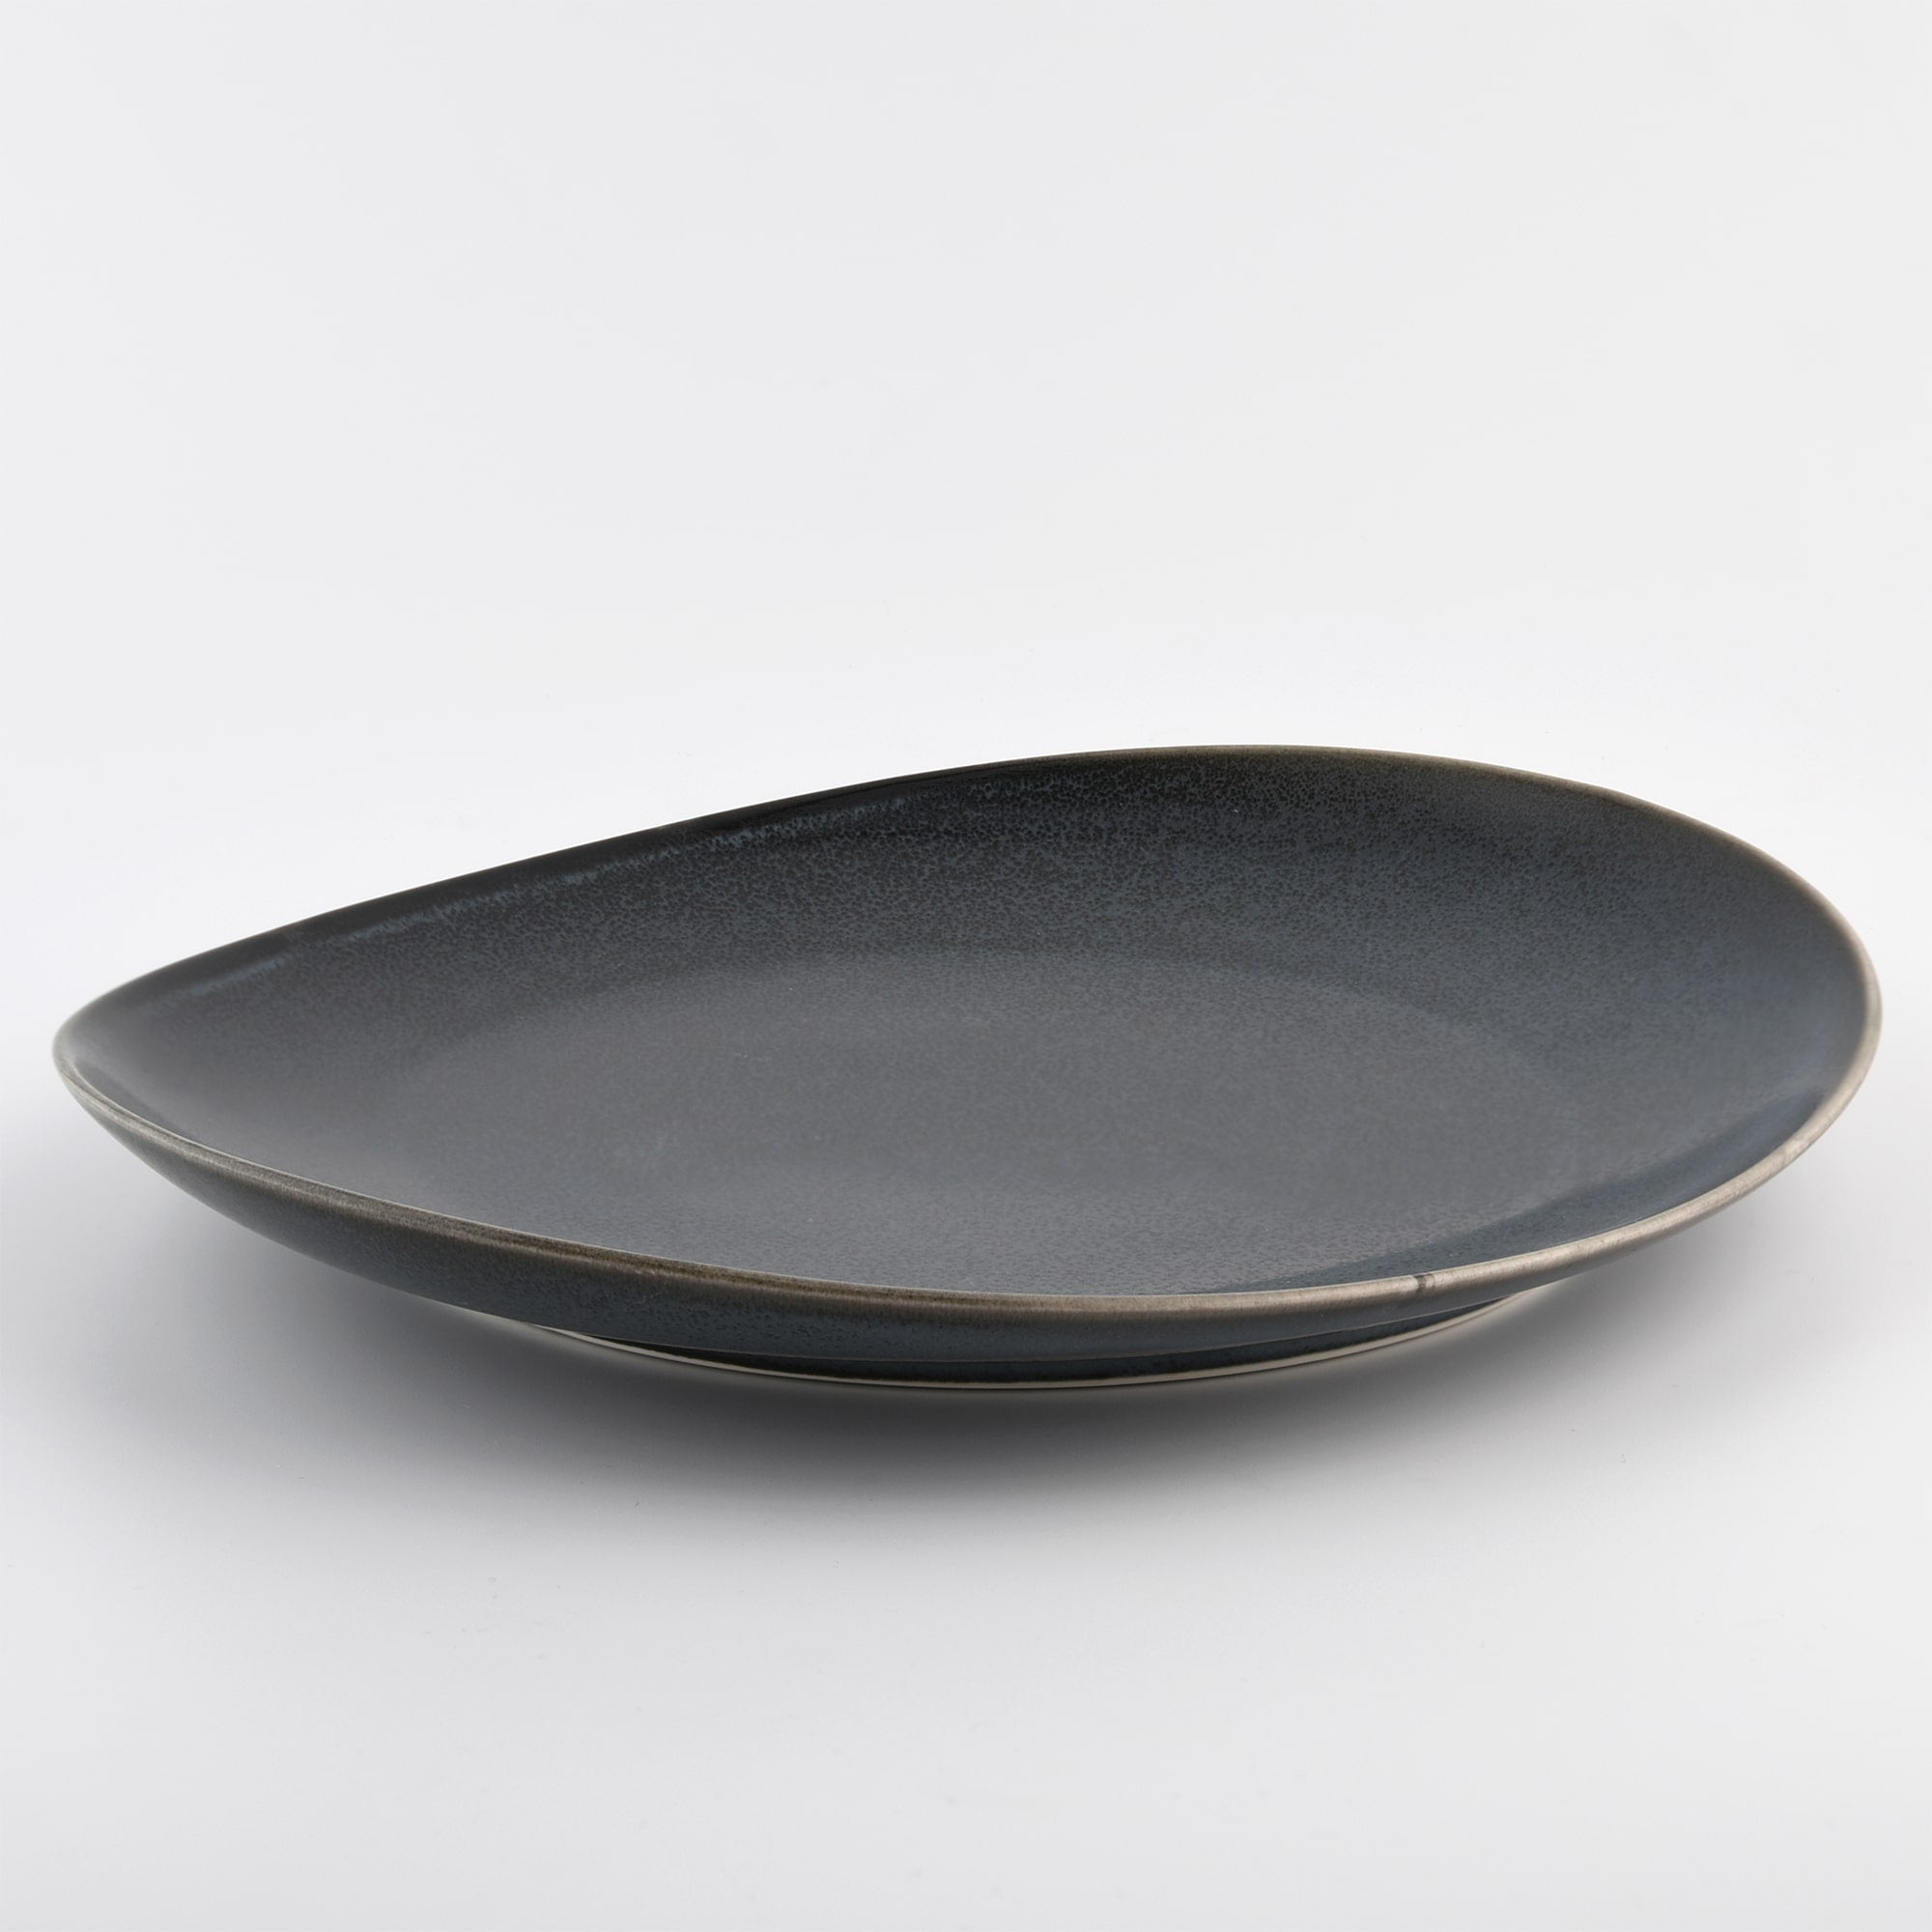 TIME BLACK Plates and Bowls Set